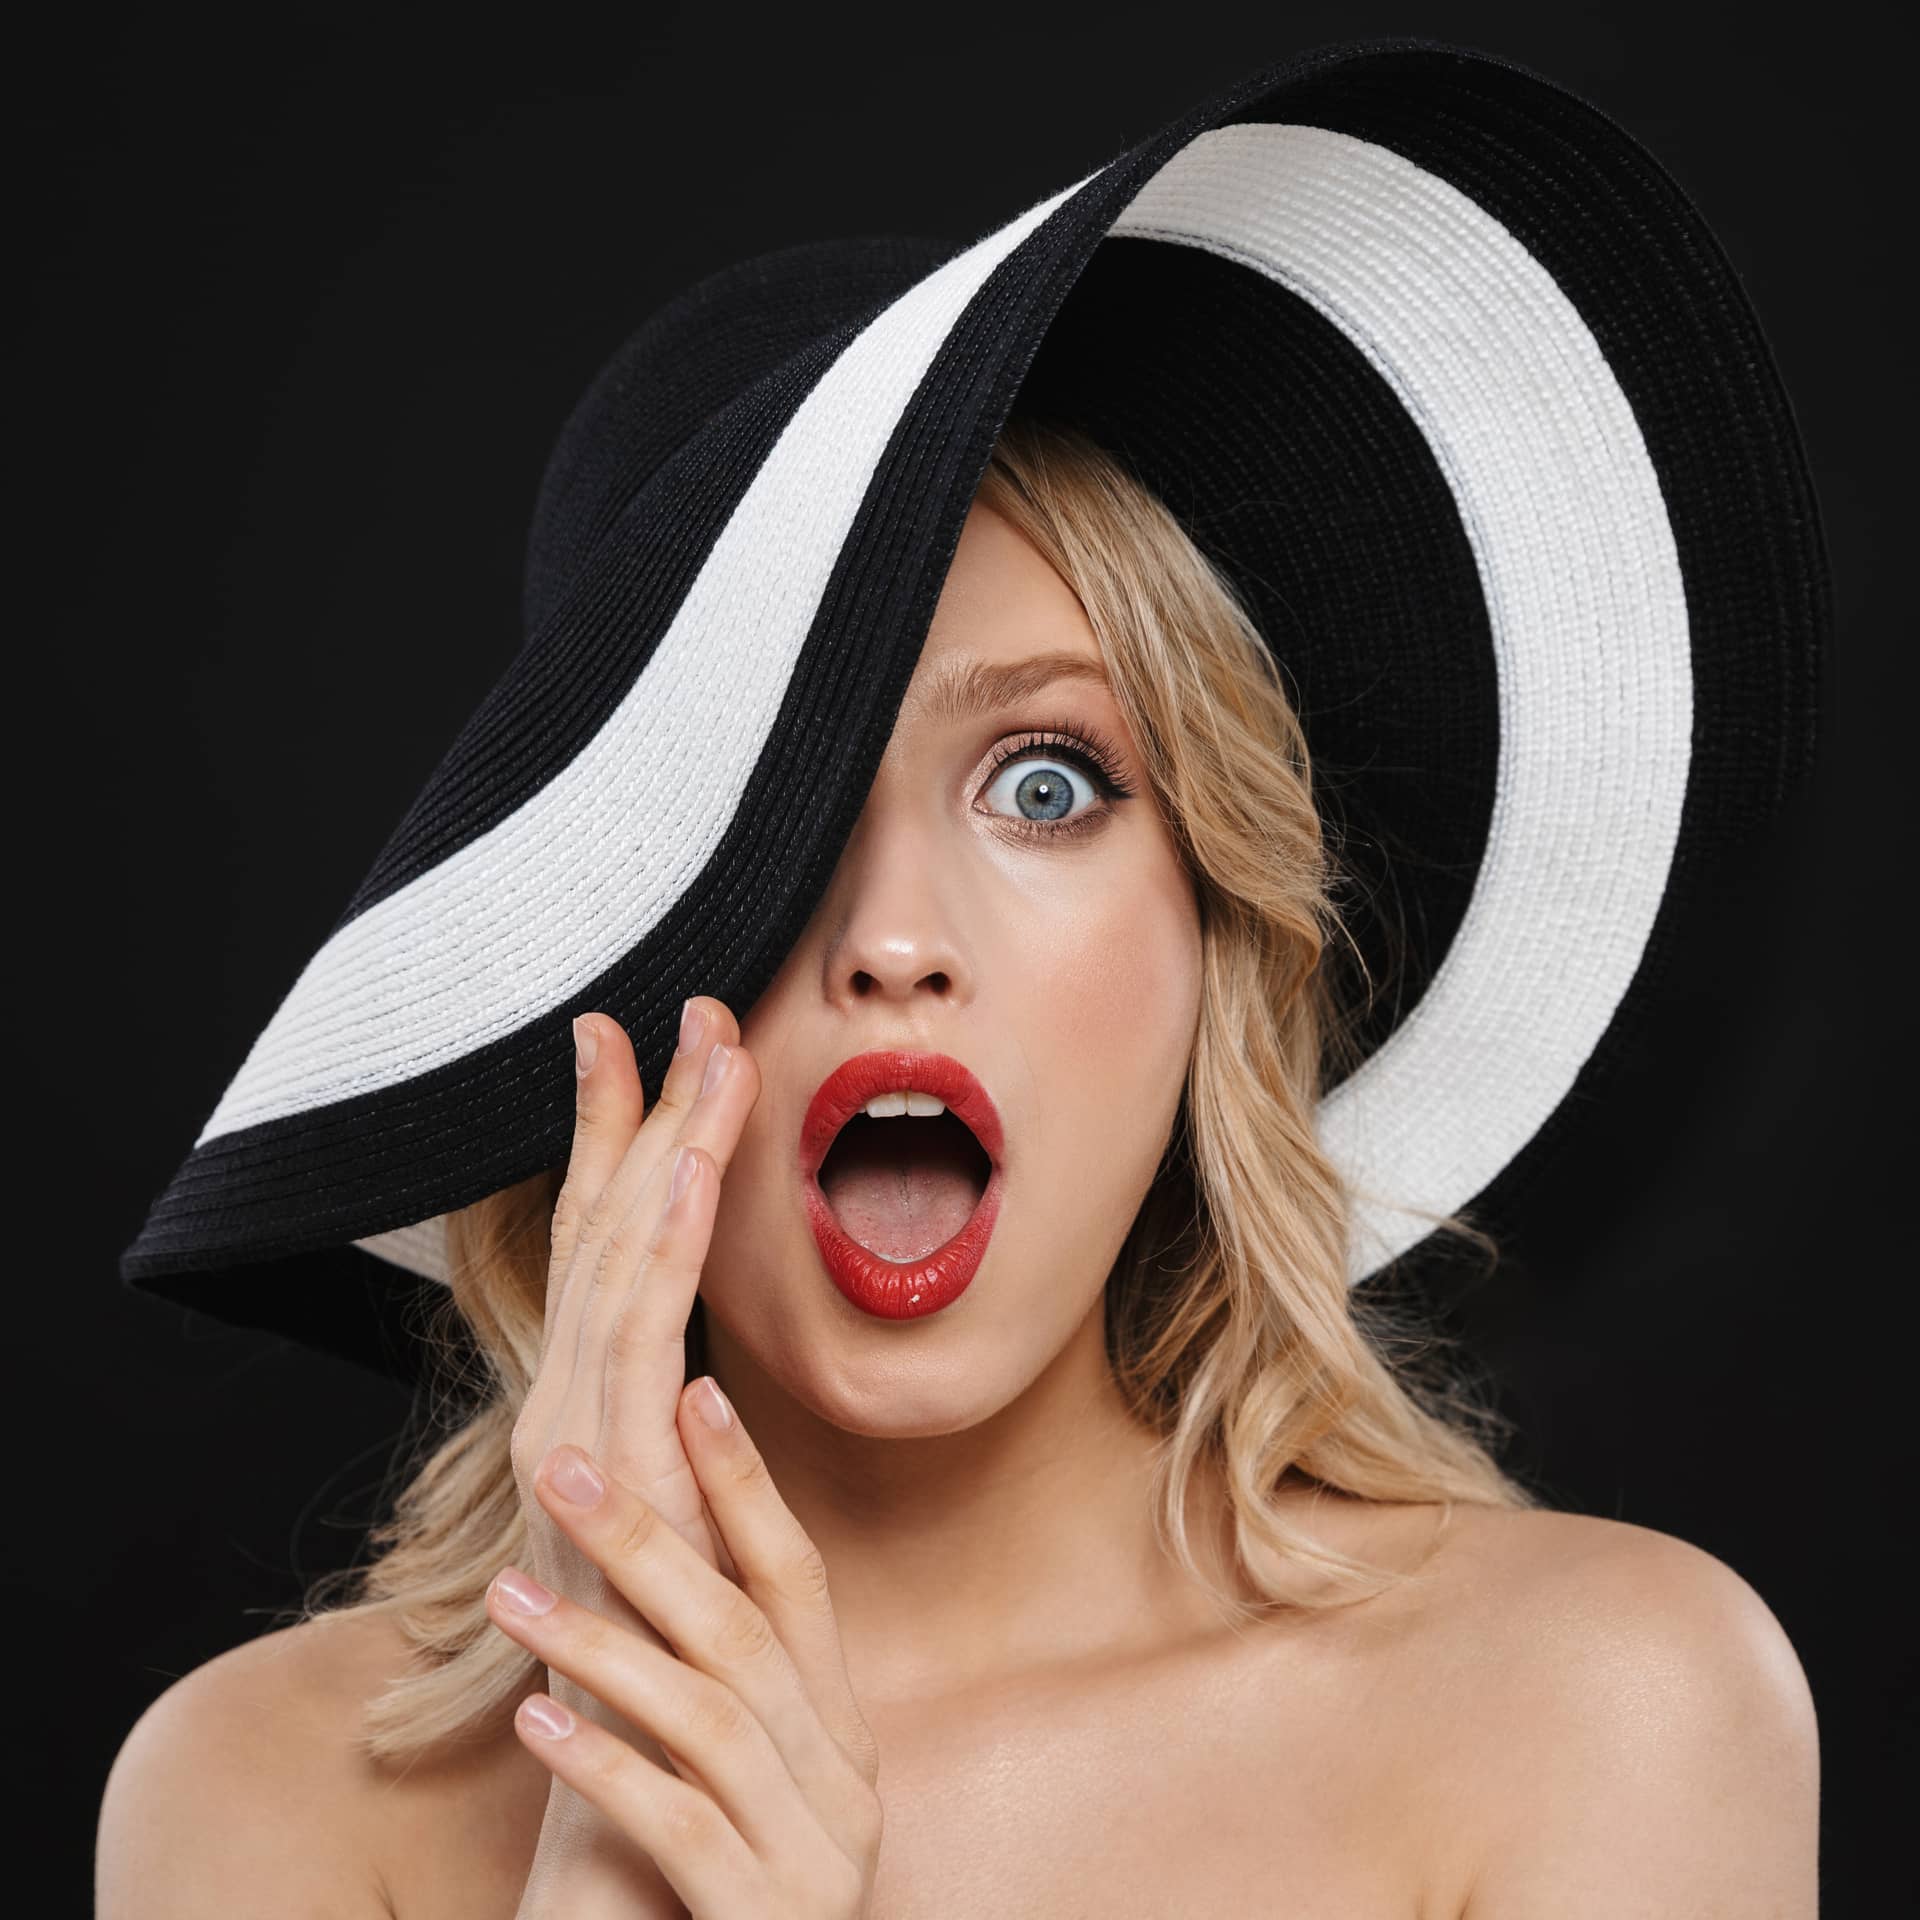 Woman with bright makeup red lips posing isolated wearing hat